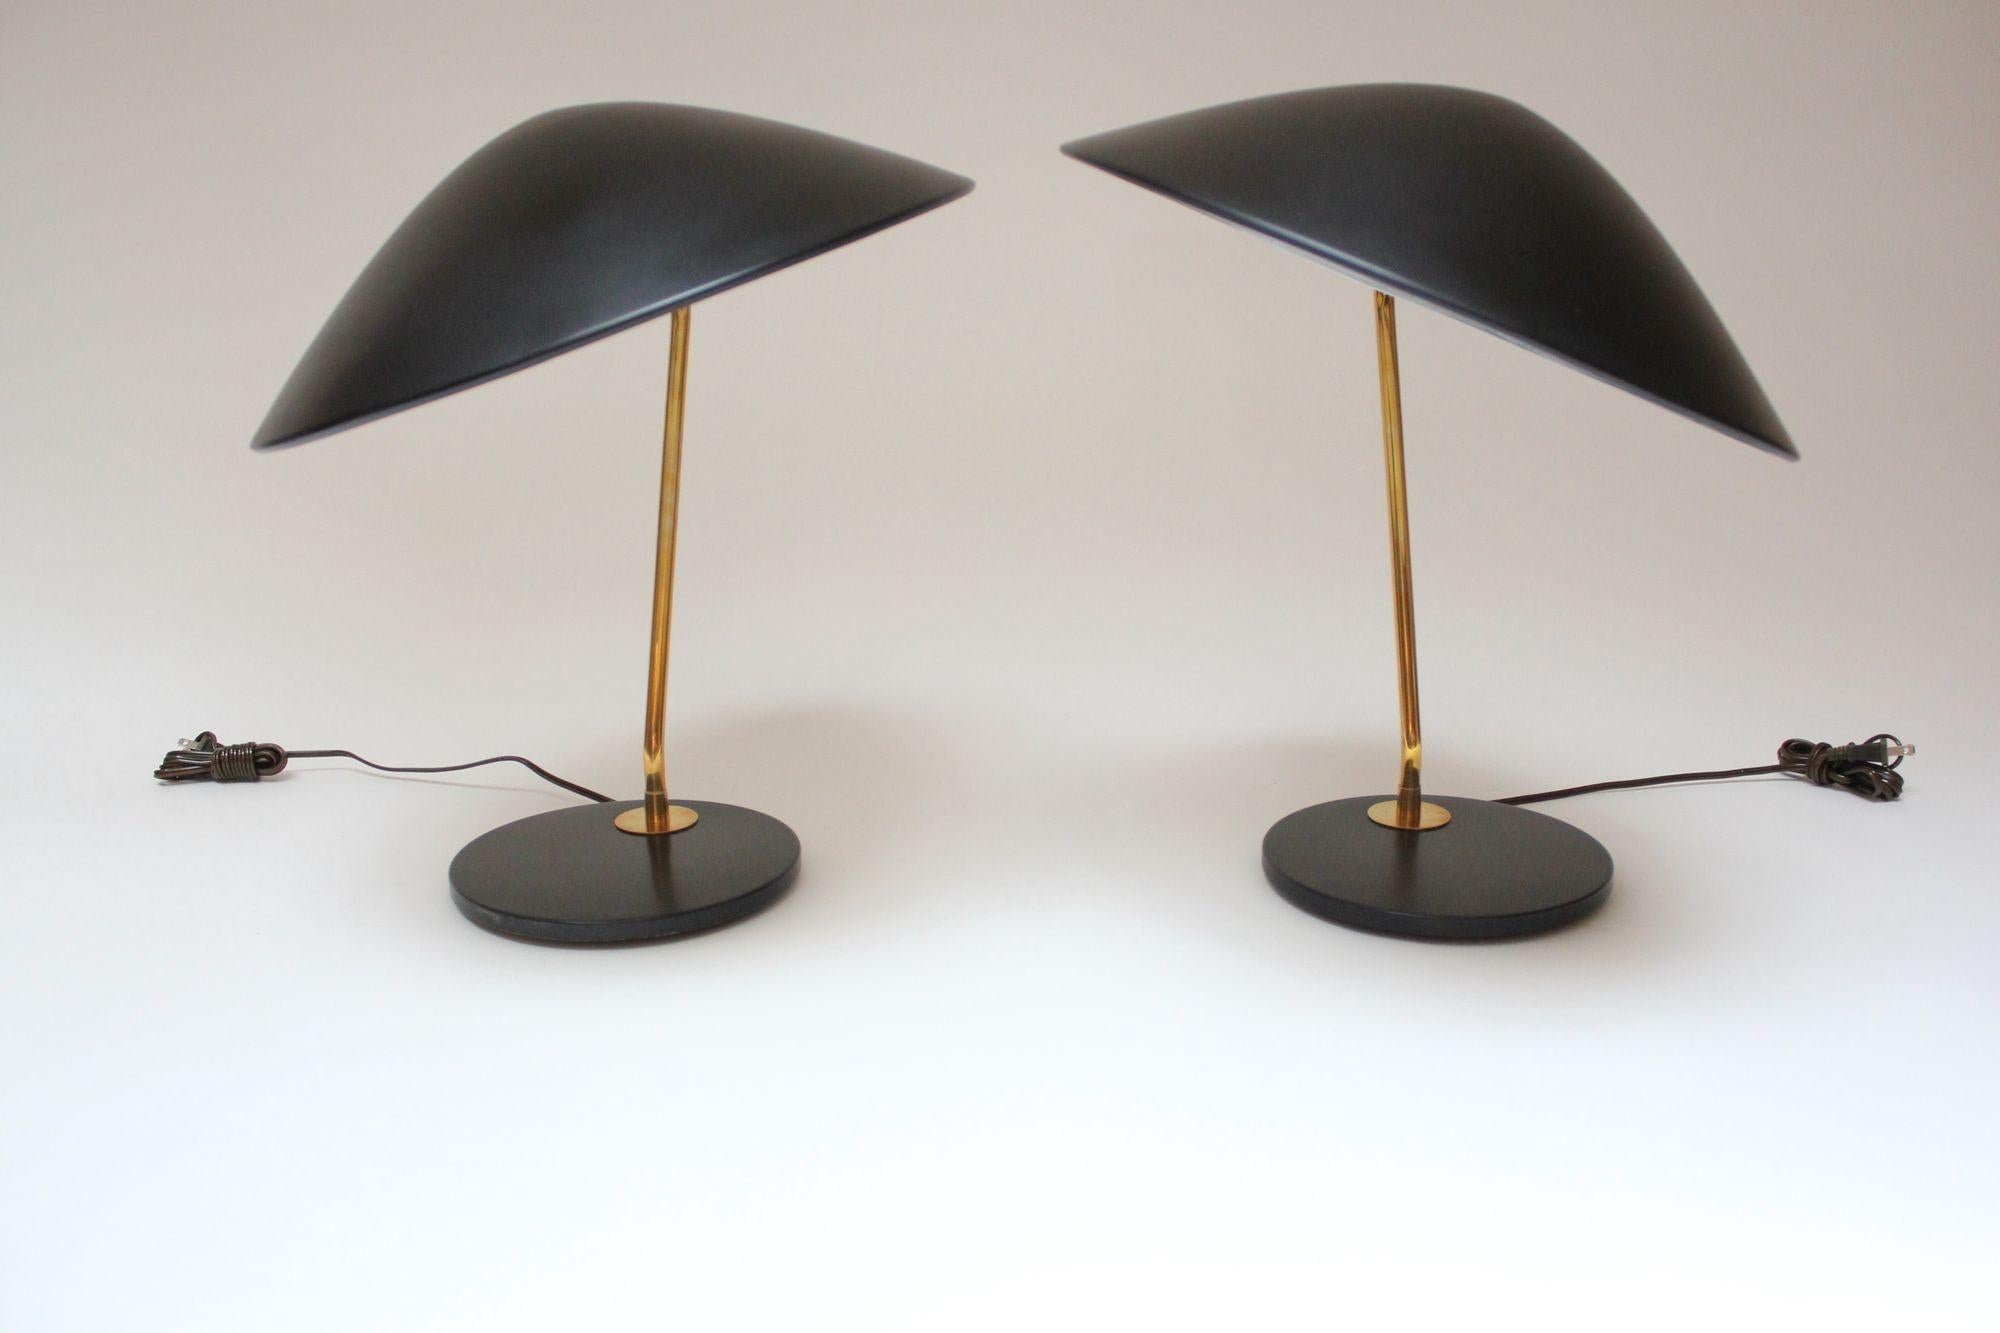 Pair of Gerald Thurston for Lightolier Brass and Metal Table Lamps In Good Condition For Sale In Brooklyn, NY